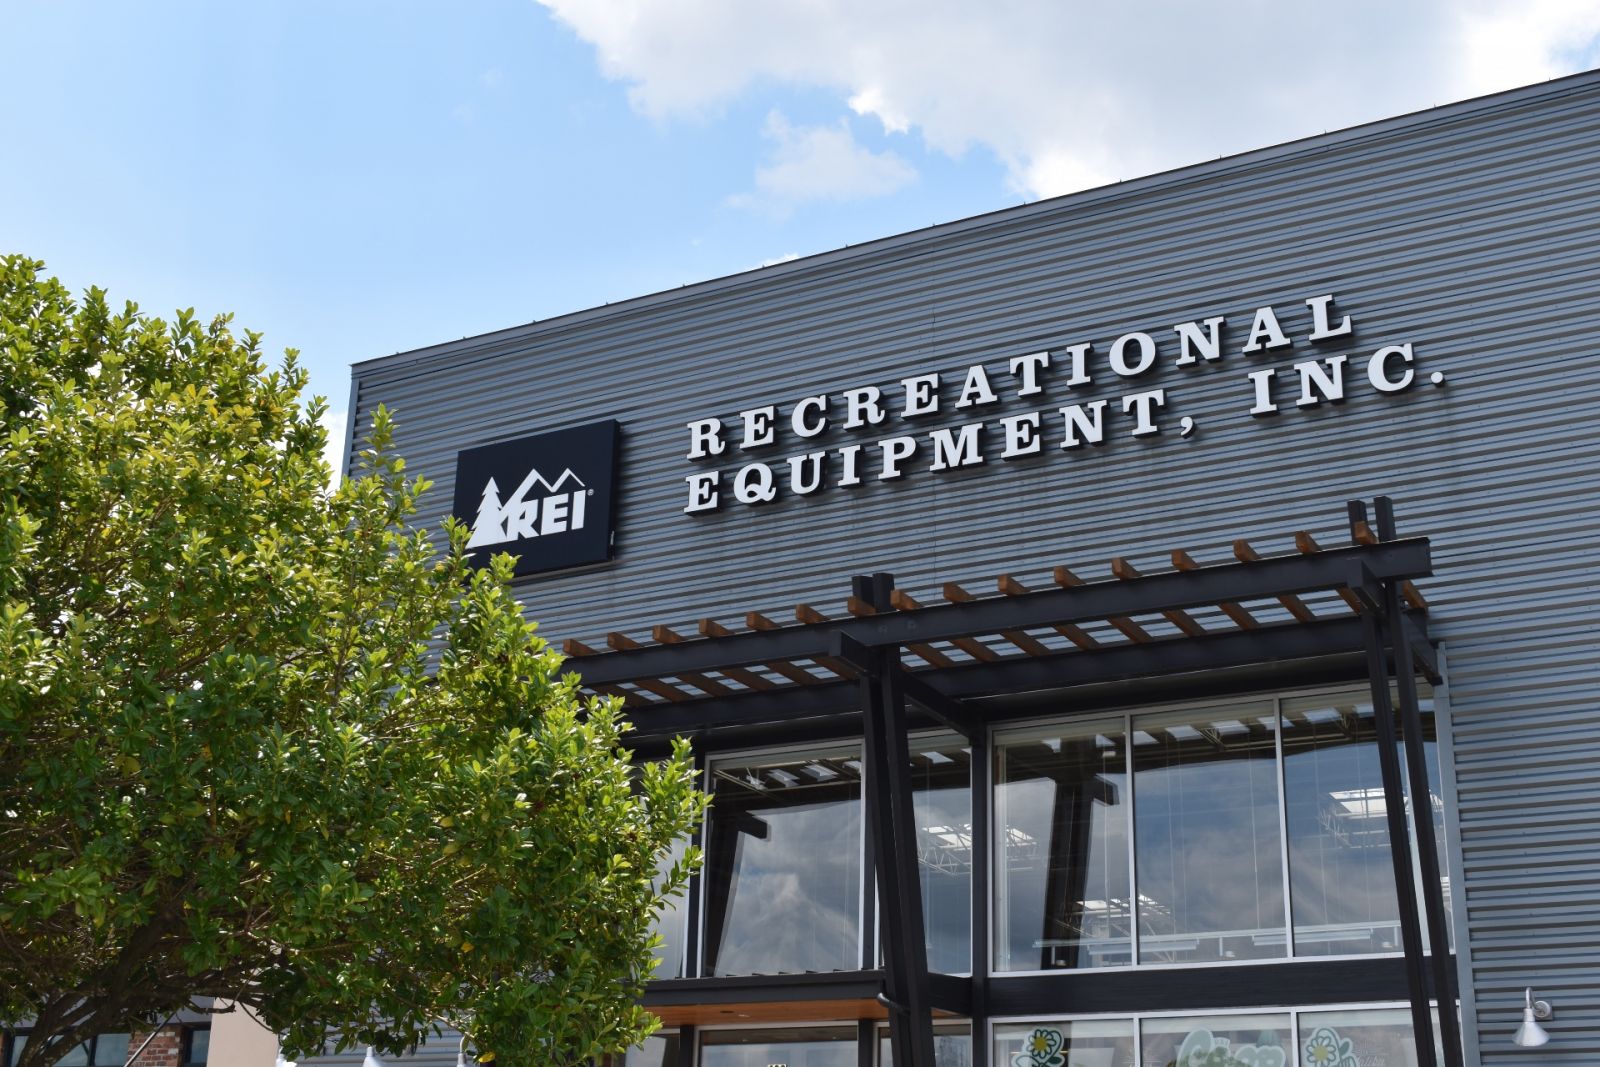 REI has a location on Woodruff Road in Greenville, shown here, as well at on Bull Street in Columbia. (Photo/Molly Hulsey)